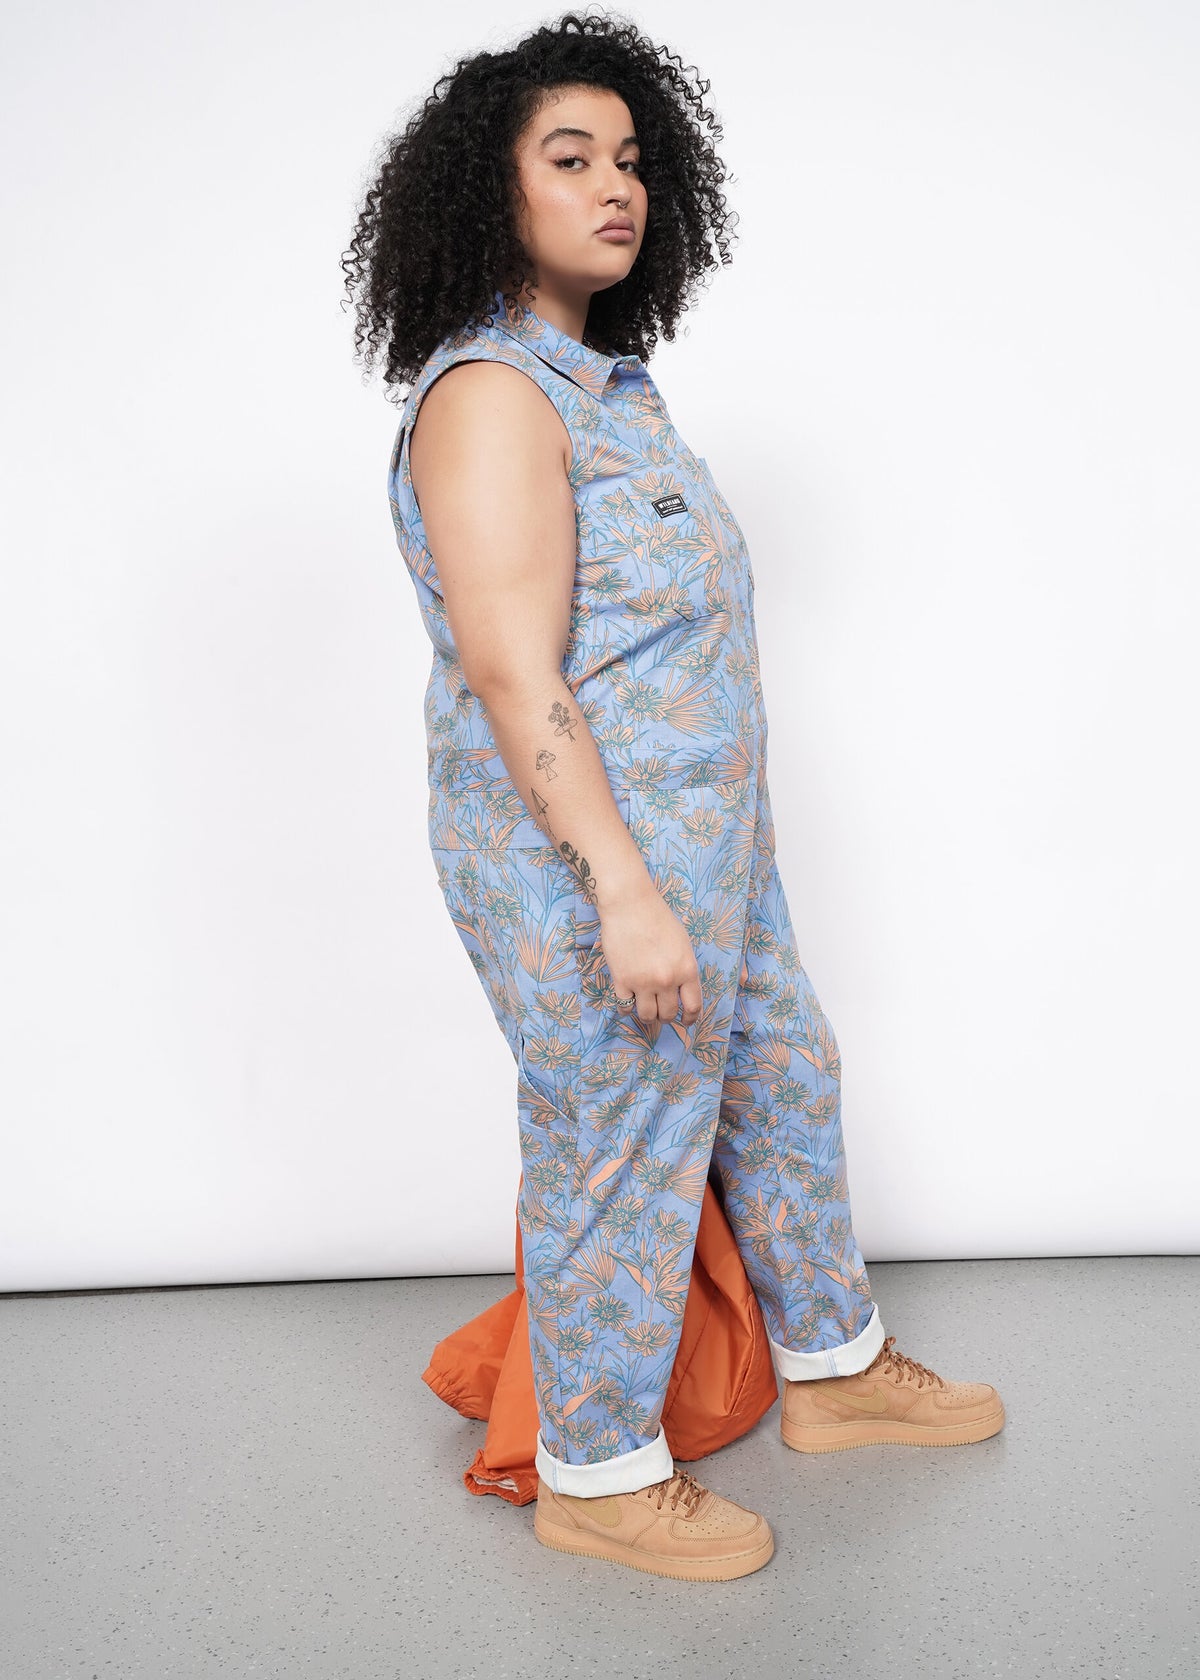 Side image of Model wearing the Essential Sleeveless Coverall in Flower Press Periwinkle in size XL with tan shoes and carrying an orange jacket